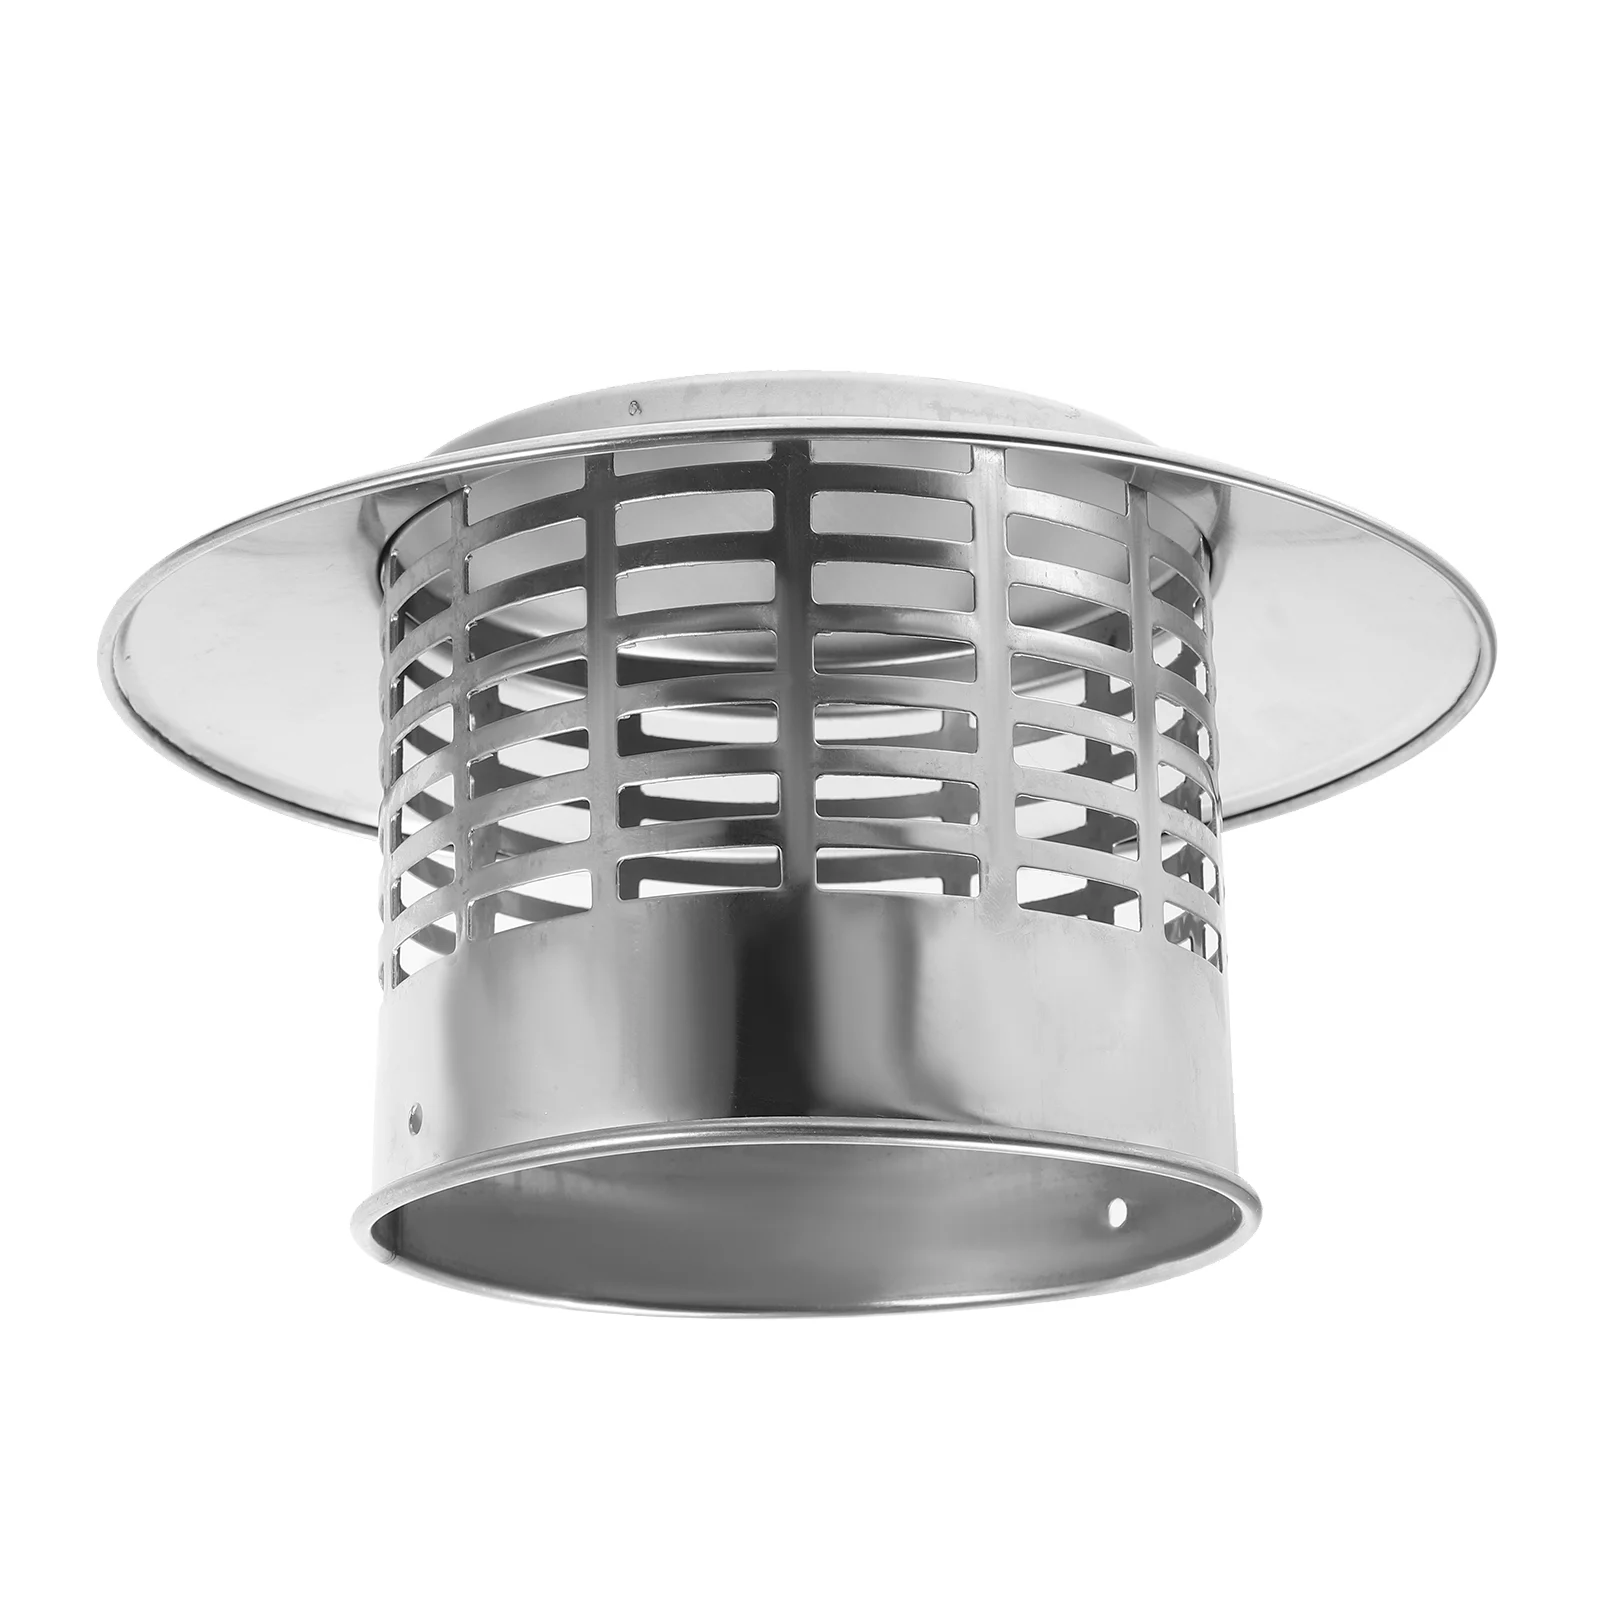 

Rainproof Vent Cap Fireplace Cover Chimney Funnel Protector Pipe 304 Smoke Roofs Ducting Ventilation